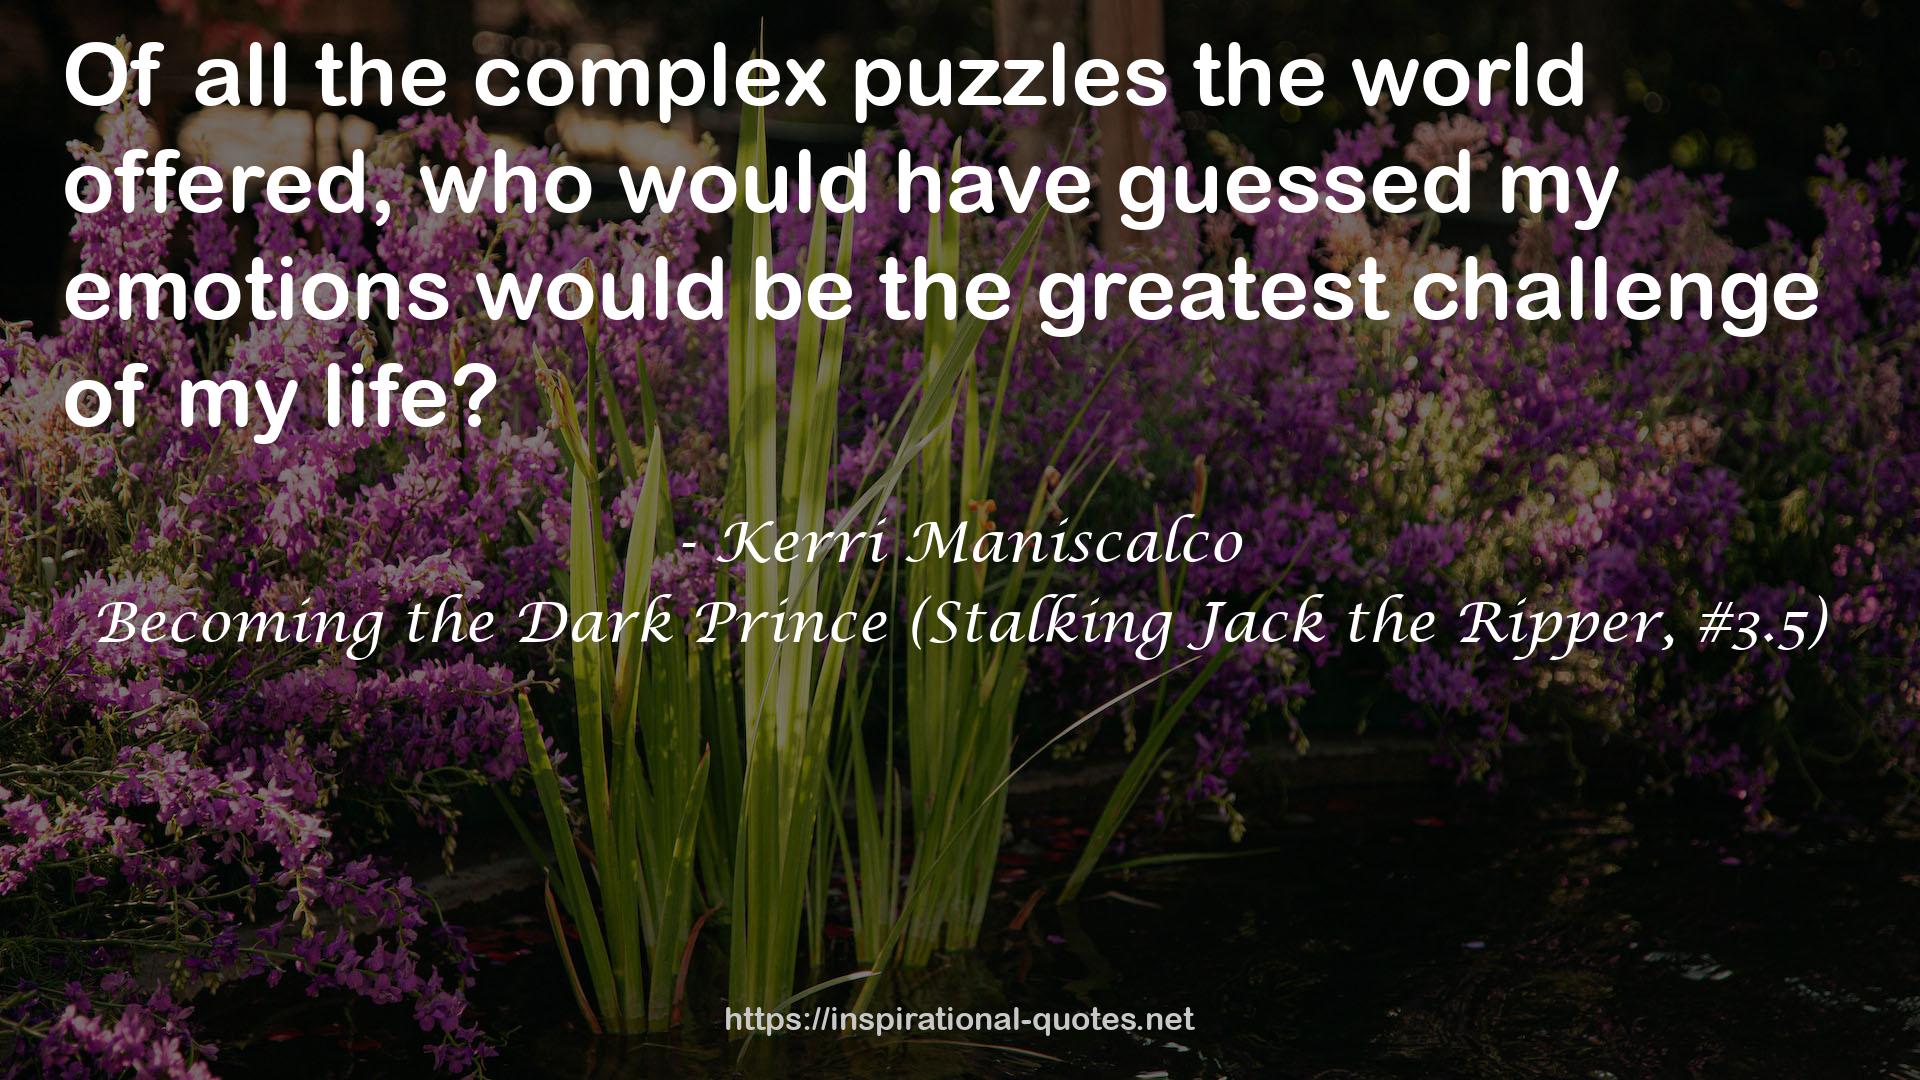 Becoming the Dark Prince (Stalking Jack the Ripper, #3.5) QUOTES